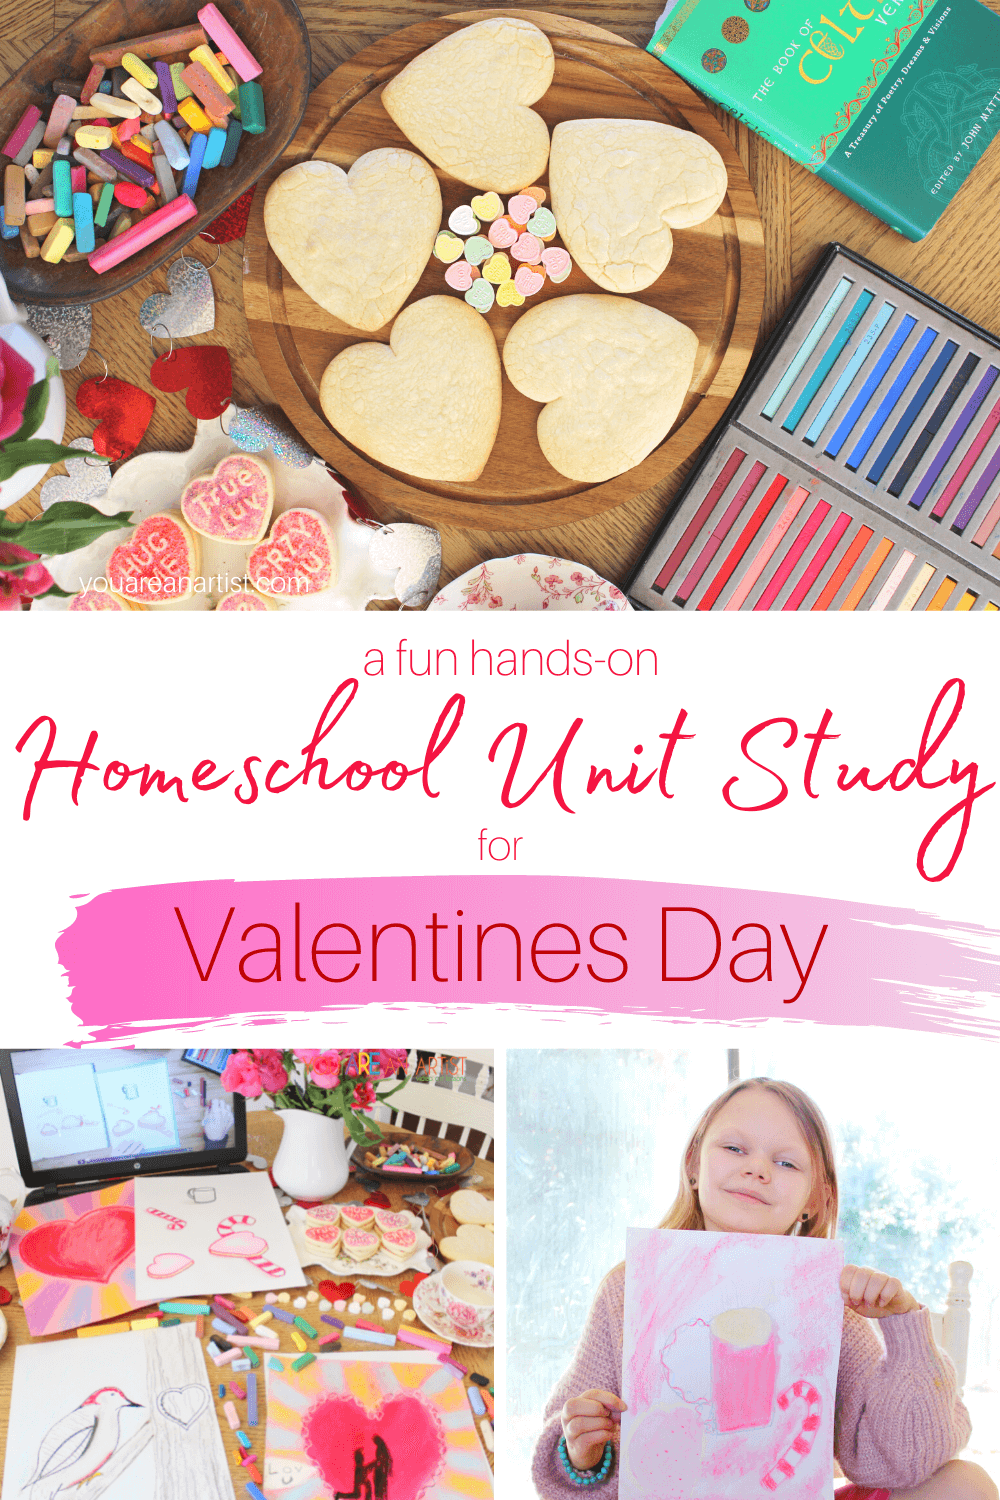 A Fun Hands-On Homeschool Unit Study For Valentines Day: Learn the history of Valentine's day while enjoying some fun activities and art with this hands-on homeschool unit study for Valentine's day! #valentinesday #candyhearts #saintvalentine #valentinesdayart #valentinesdayfun #valentinesdayunitstudy #valentinesdayideas #valentinesdayresources